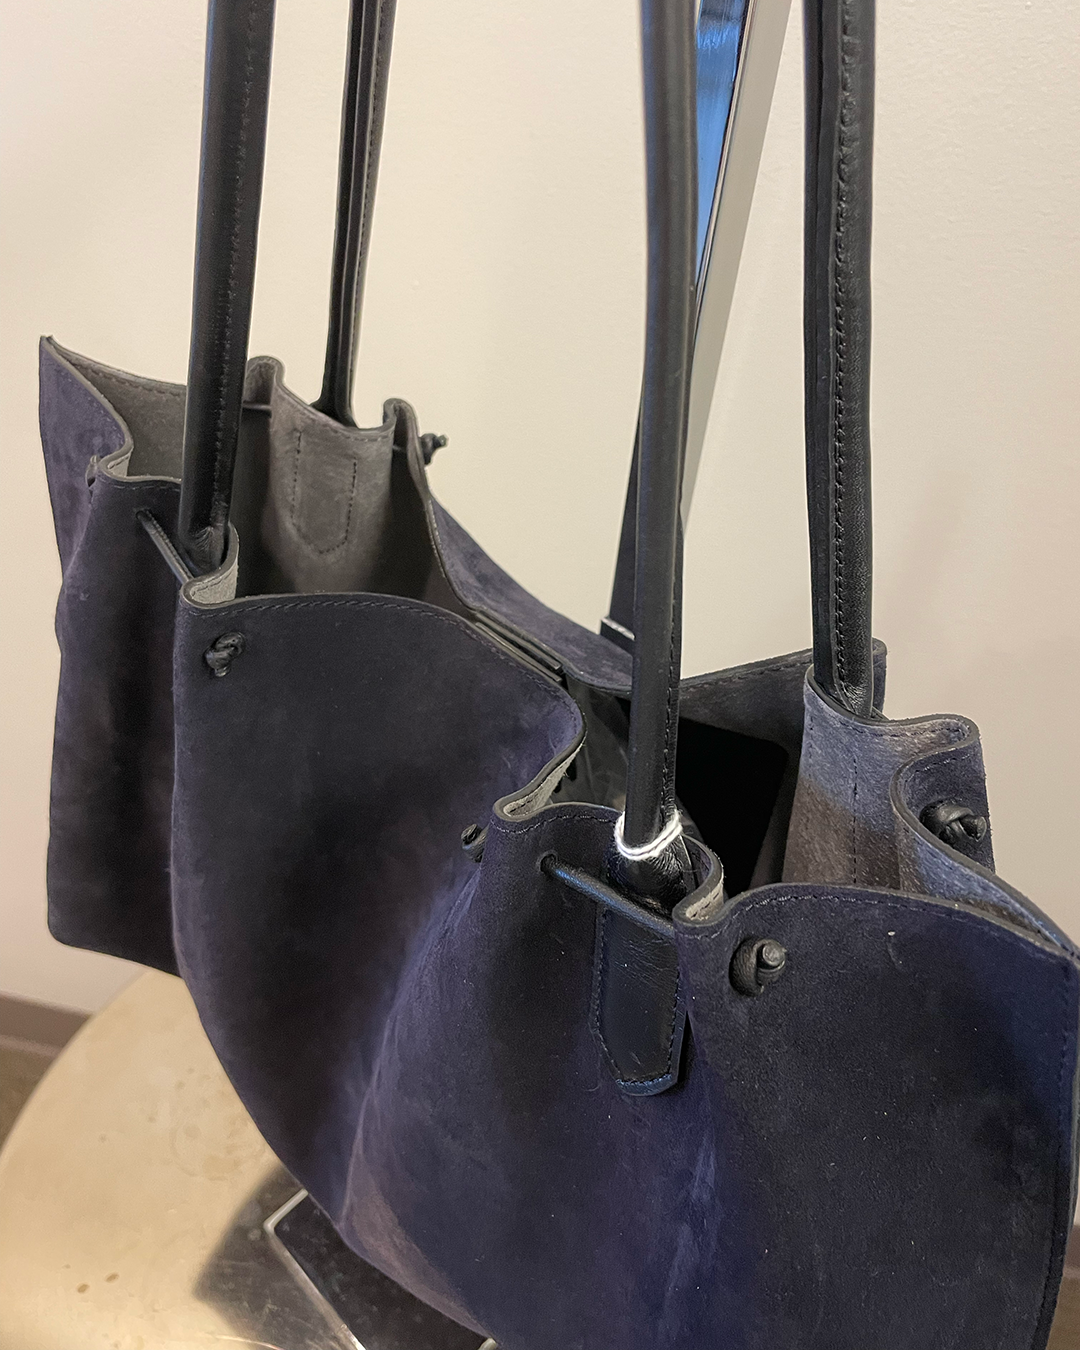 Deborah Kent's Boutique in South Tampa — Ink Suede Puckered Tote by B. May  Bags